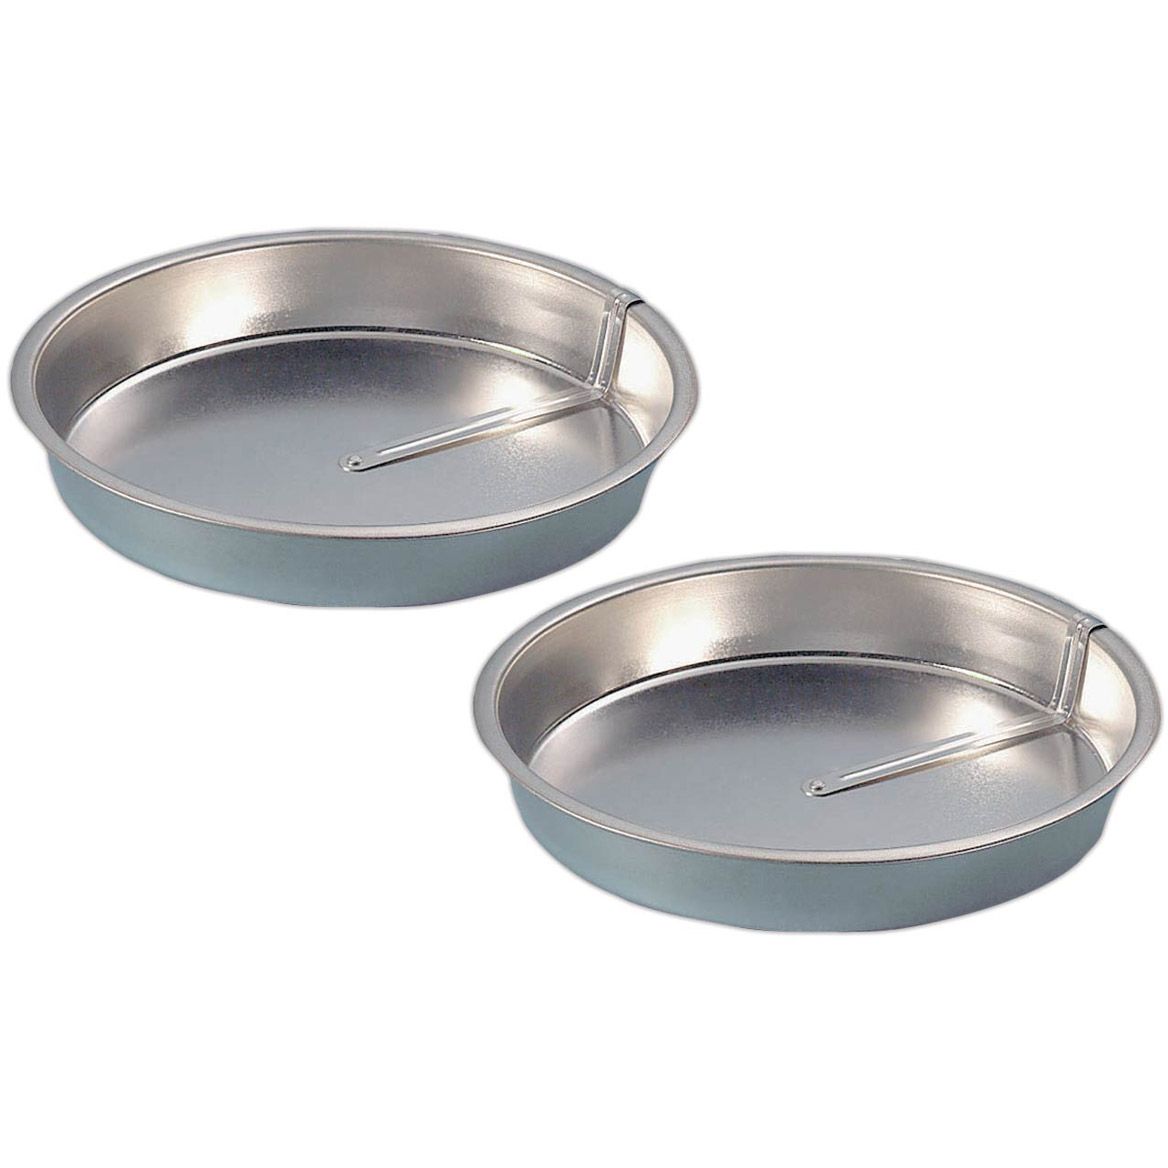 Easy Release Cake Pan Set of 2 + '-' + 311092